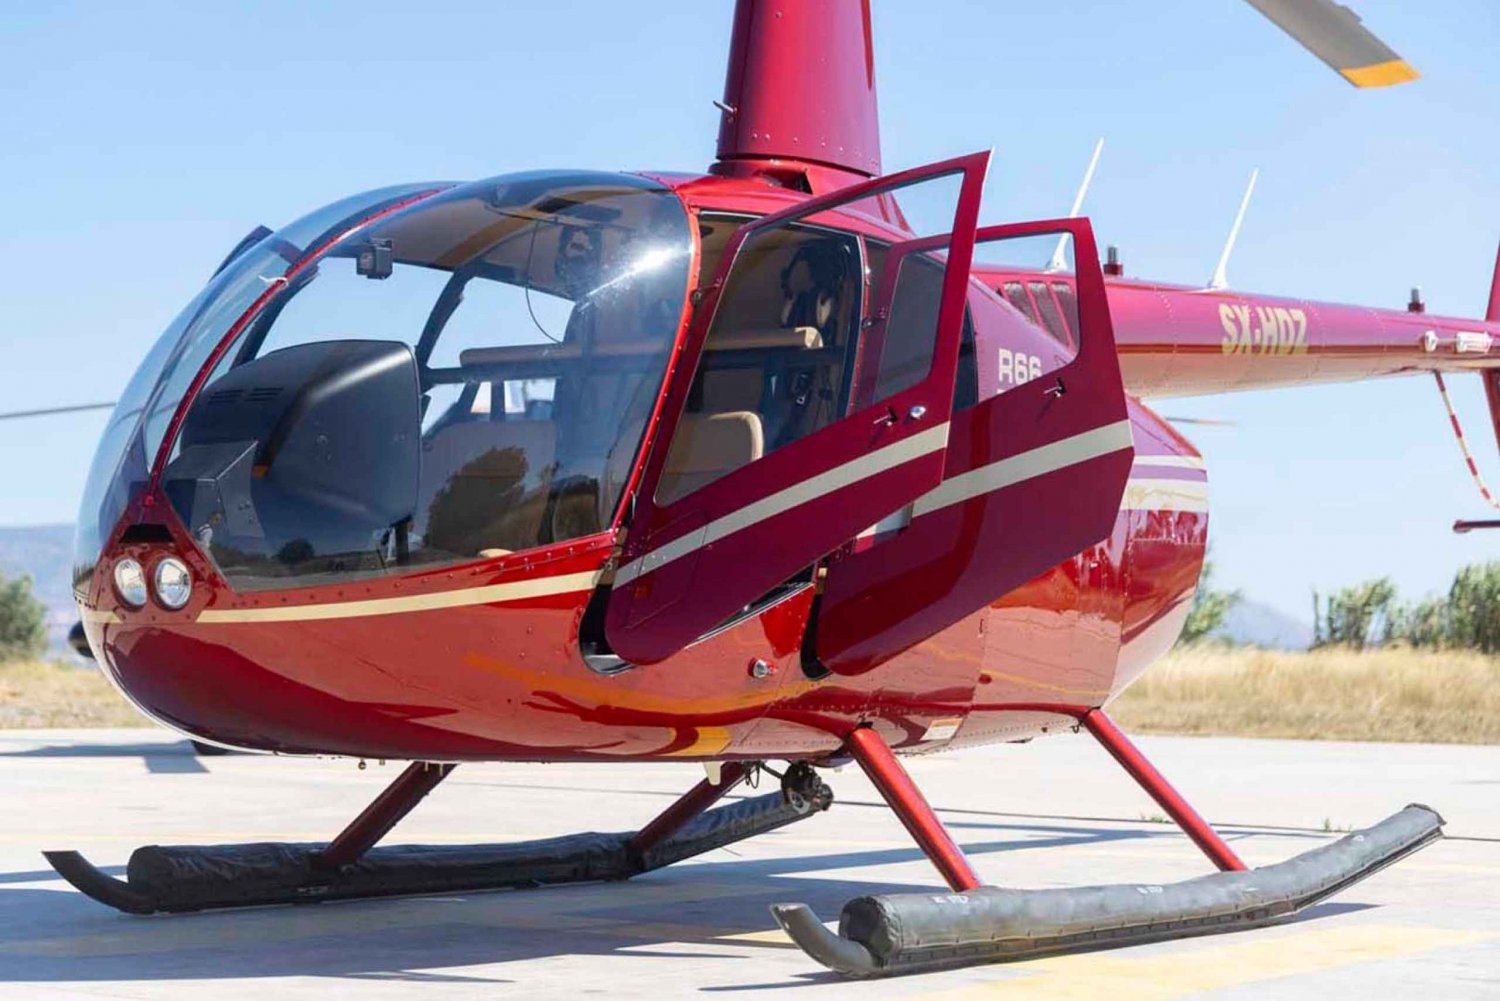 Los: 1-Way Private Helicopter Transfer to the Greek Islands